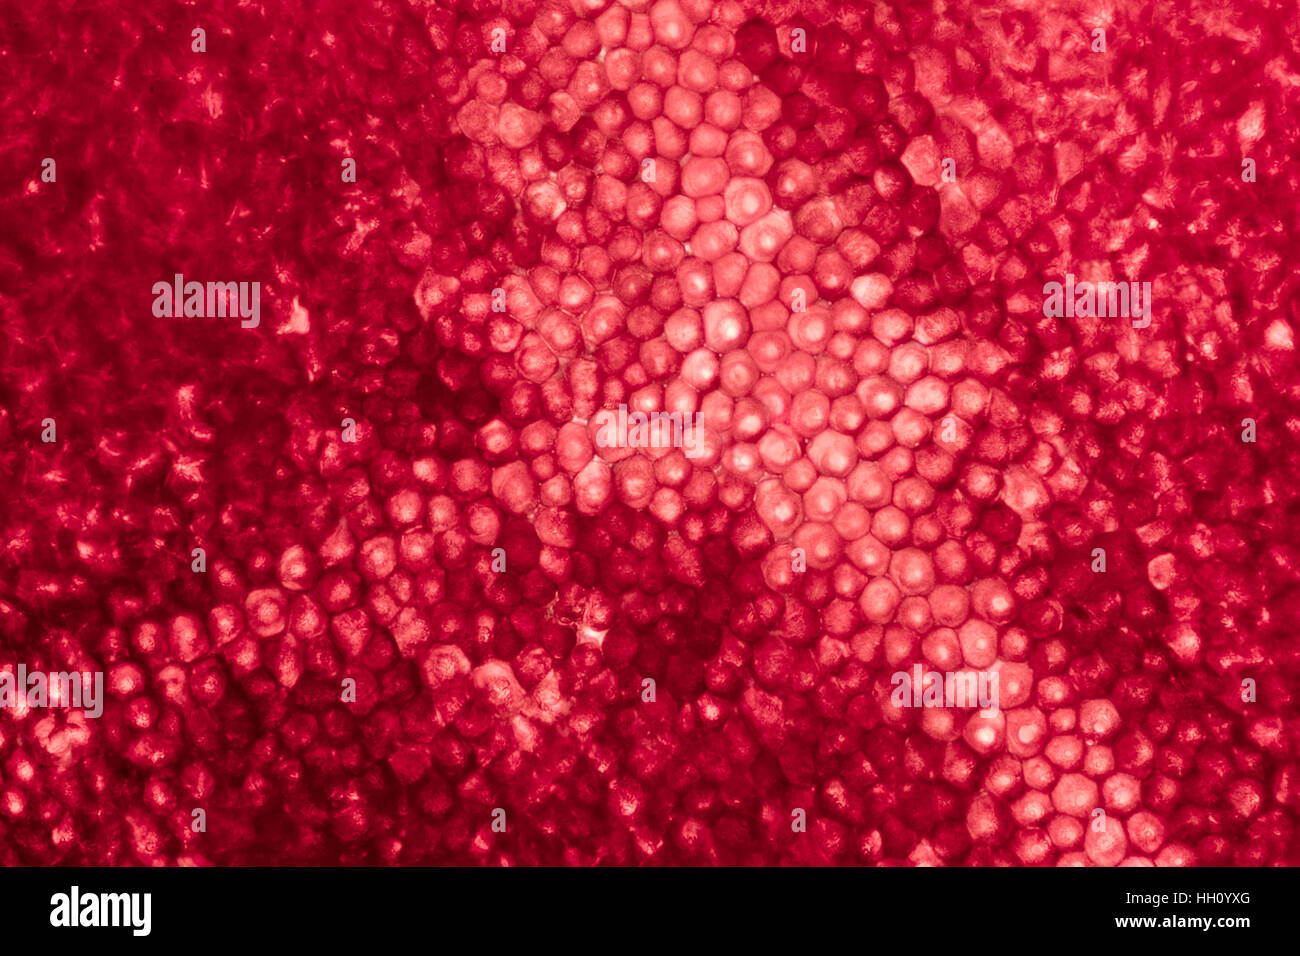 full frame abstract microscopic shot showing the cellular structure of a red rose petal Stock Photo